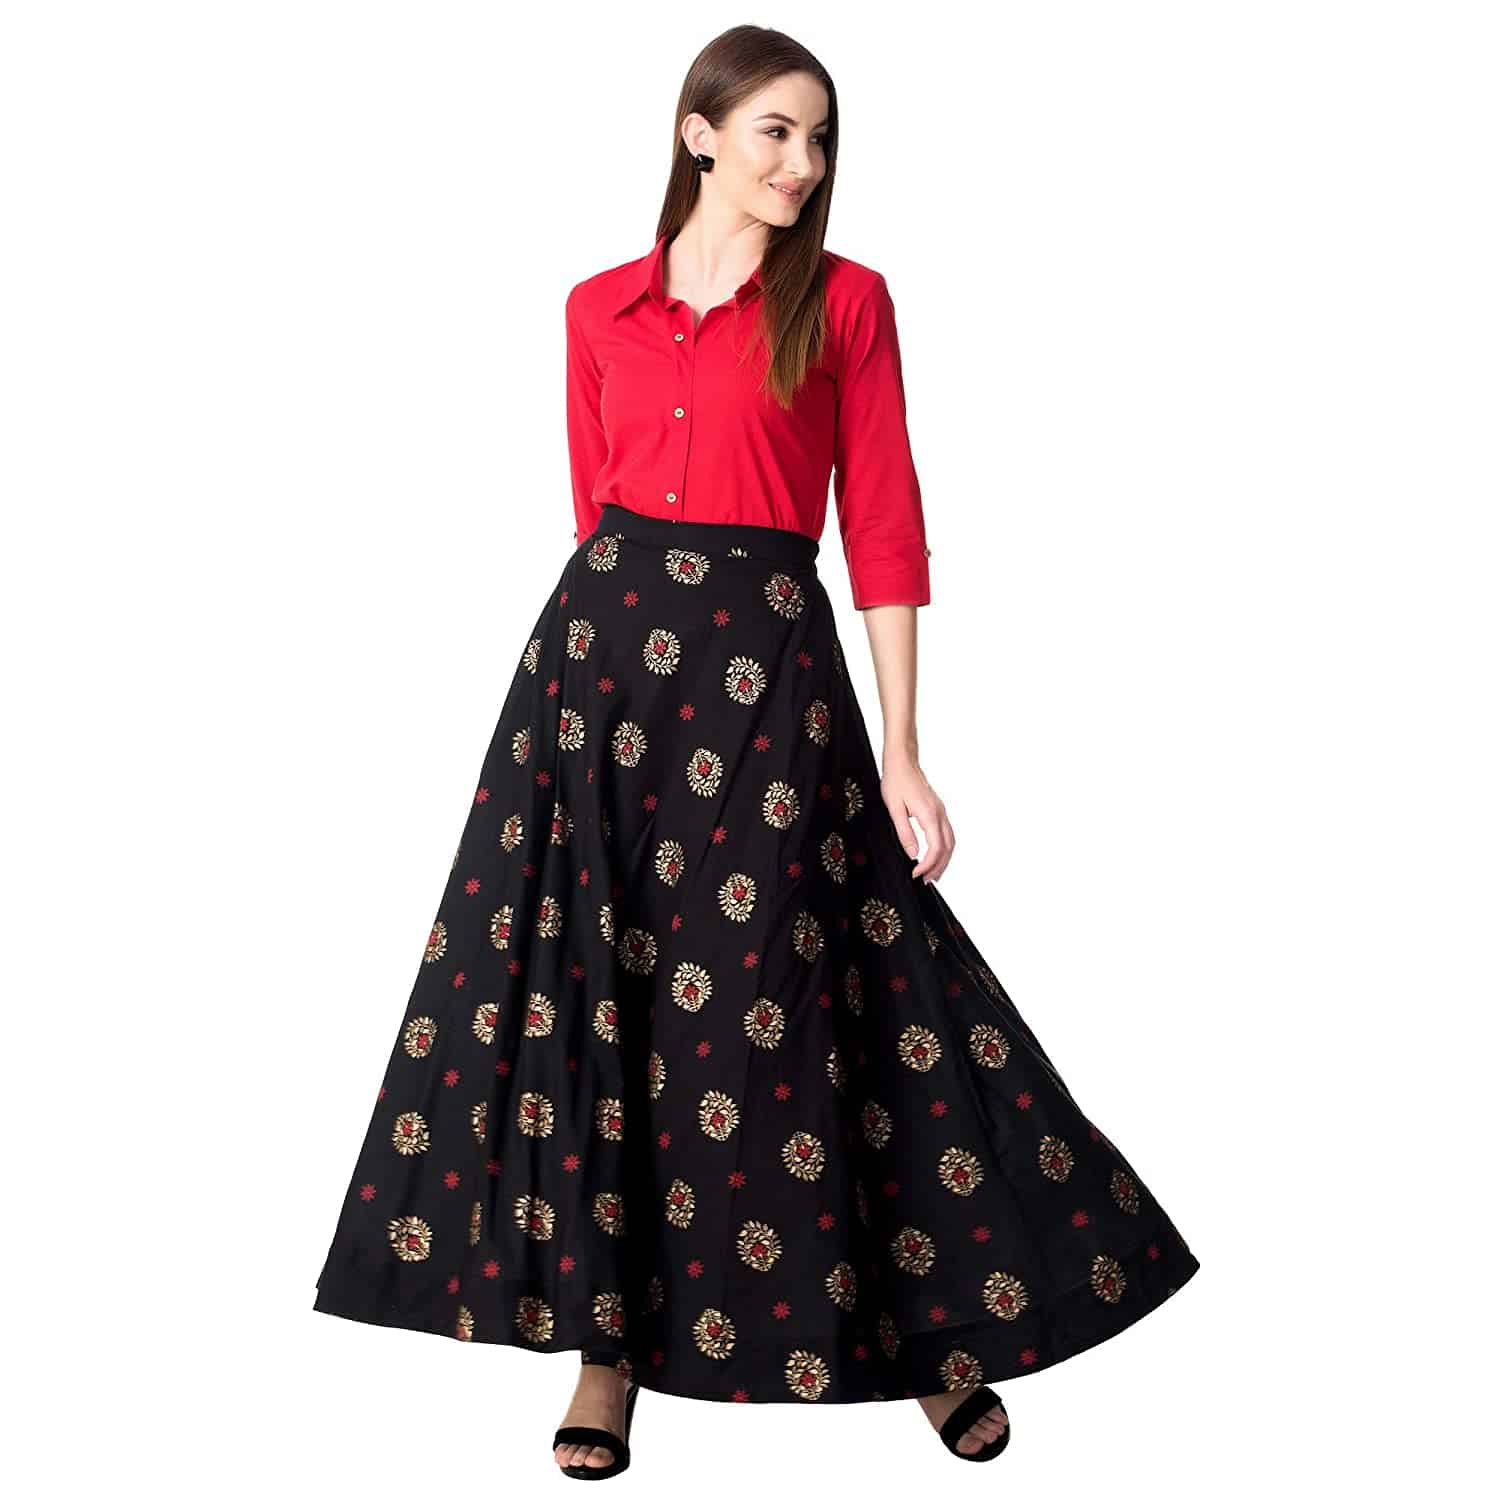 Don't Miss Out New Top 10 Long Skirts For Girls. Long Skirts